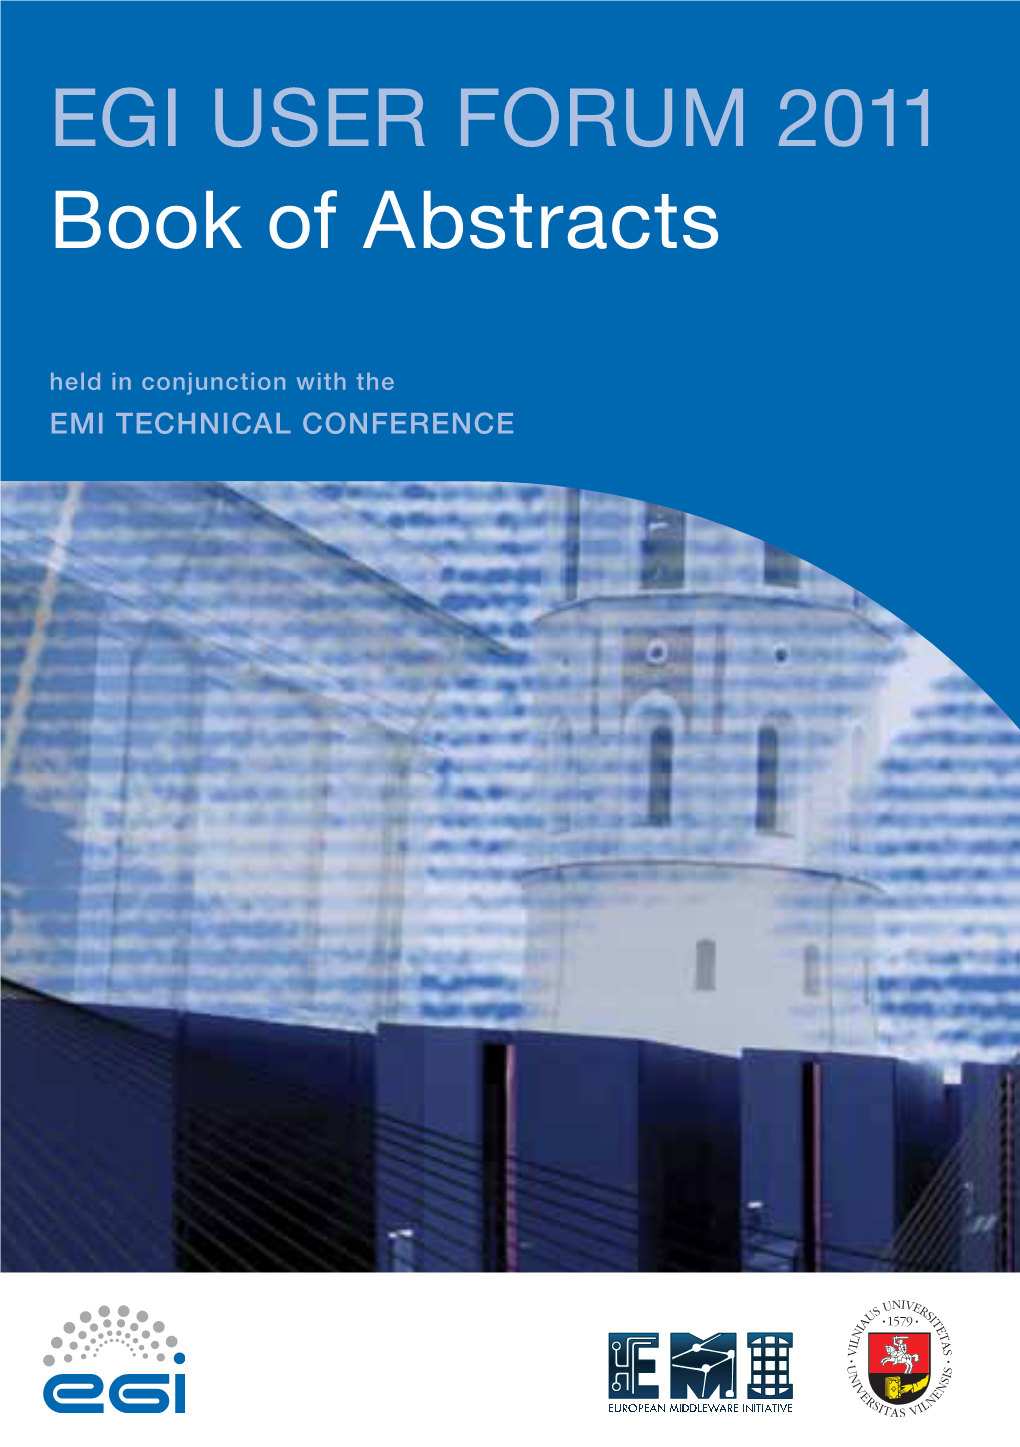 EGI USER FORUM 2011 Book of Abstracts